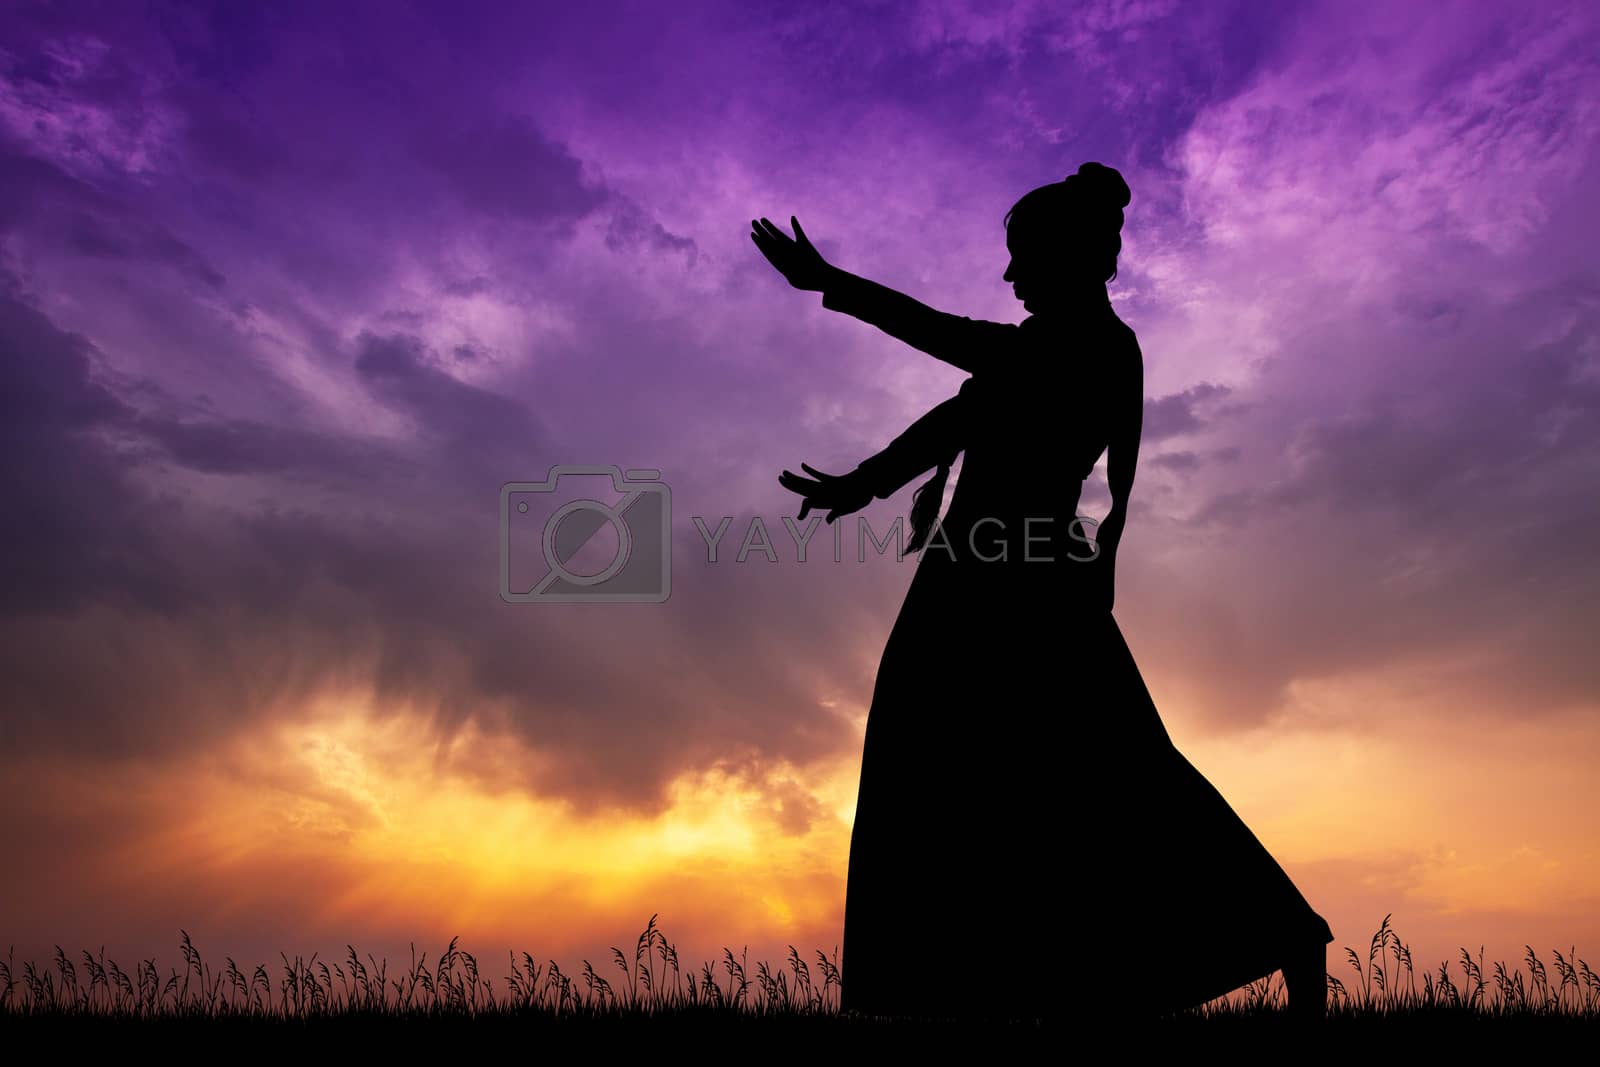 Royalty free image of Indian dance at sunset by adrenalina